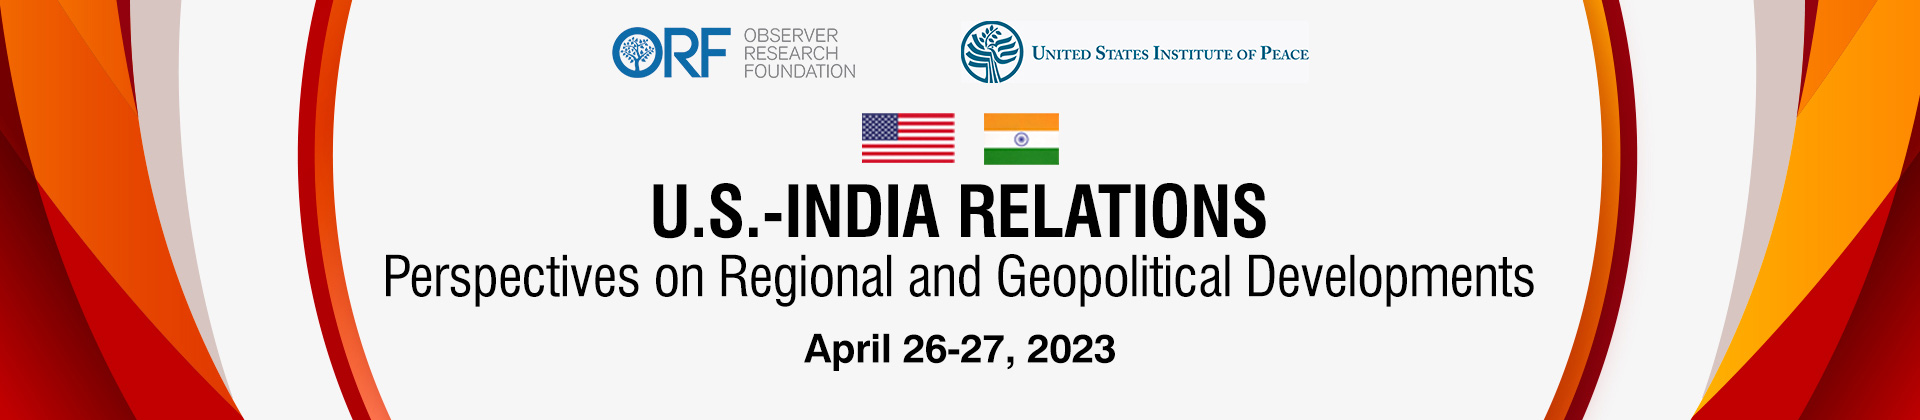 U.S.-India Relations: Perspectives on Regional and Geopolitical Developments